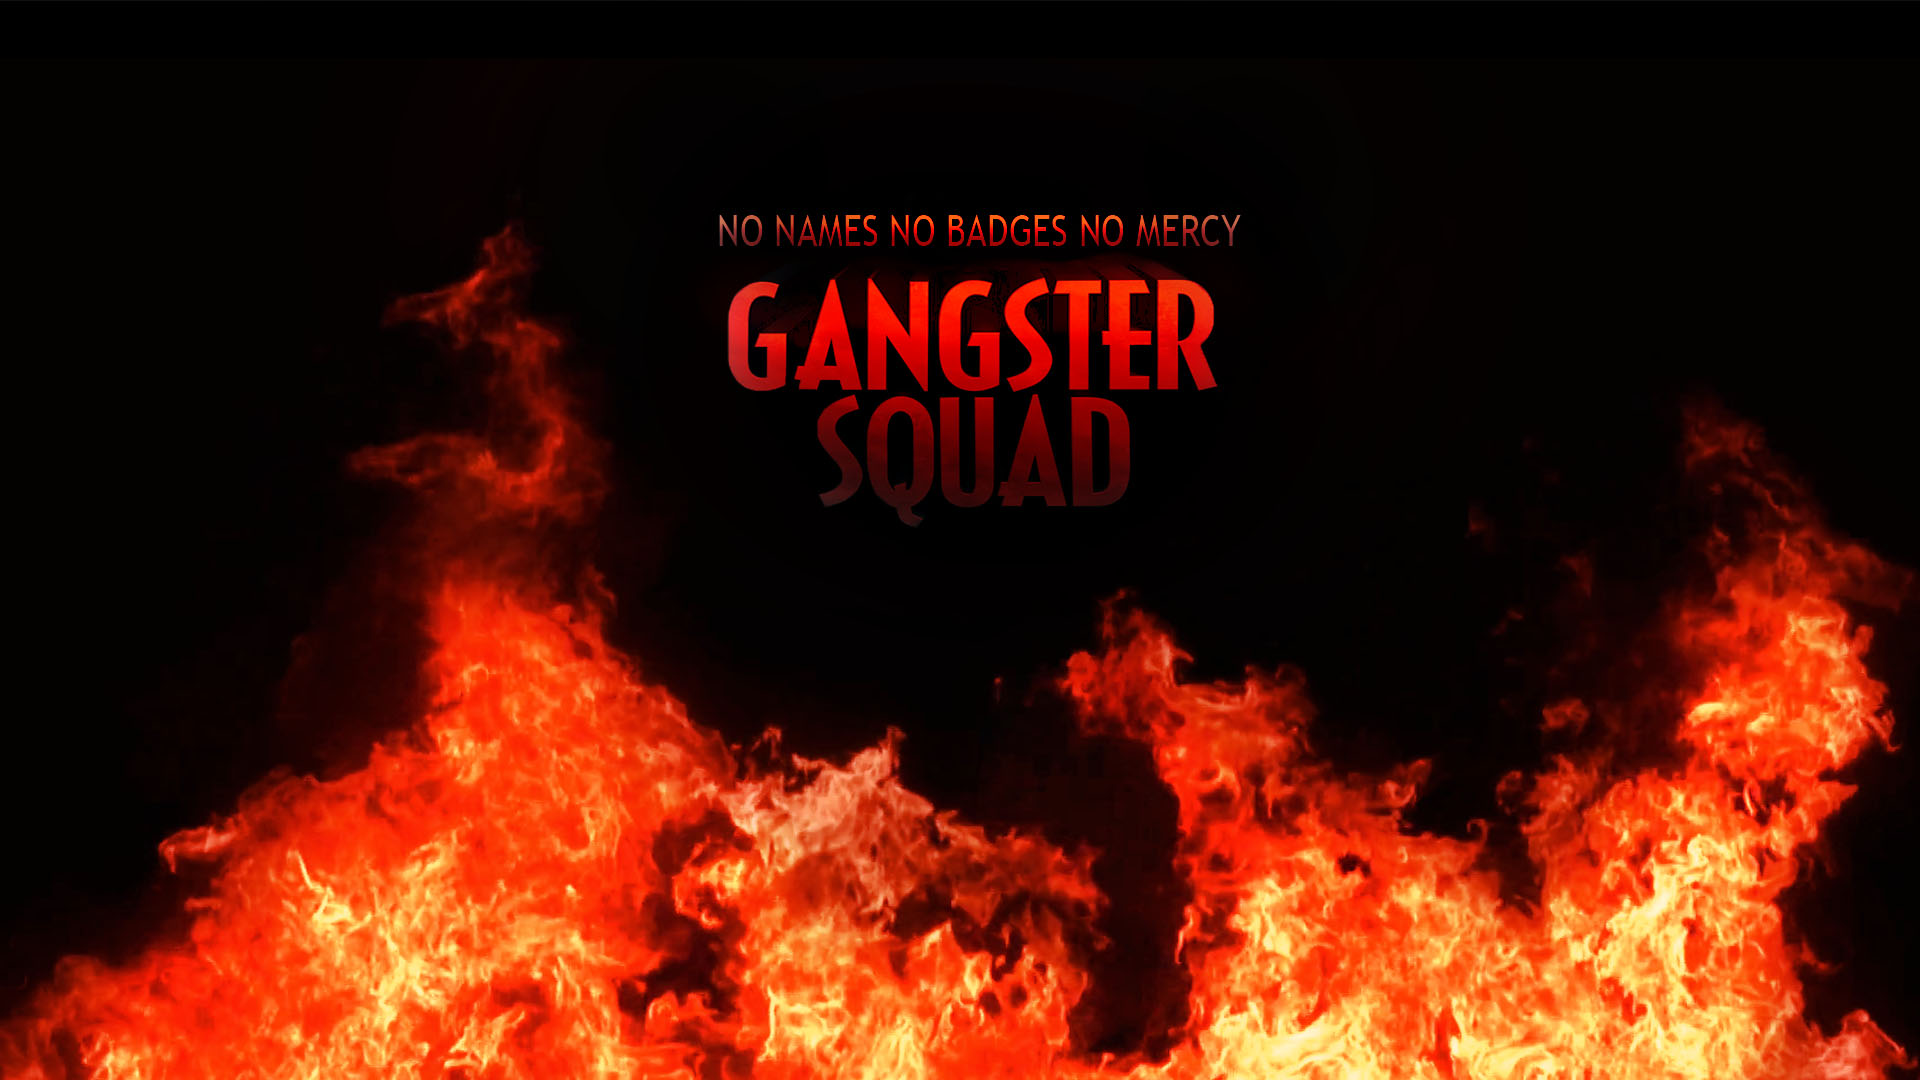 Gangster Wallpaper Gangster squad wallpaper by 1920x1080